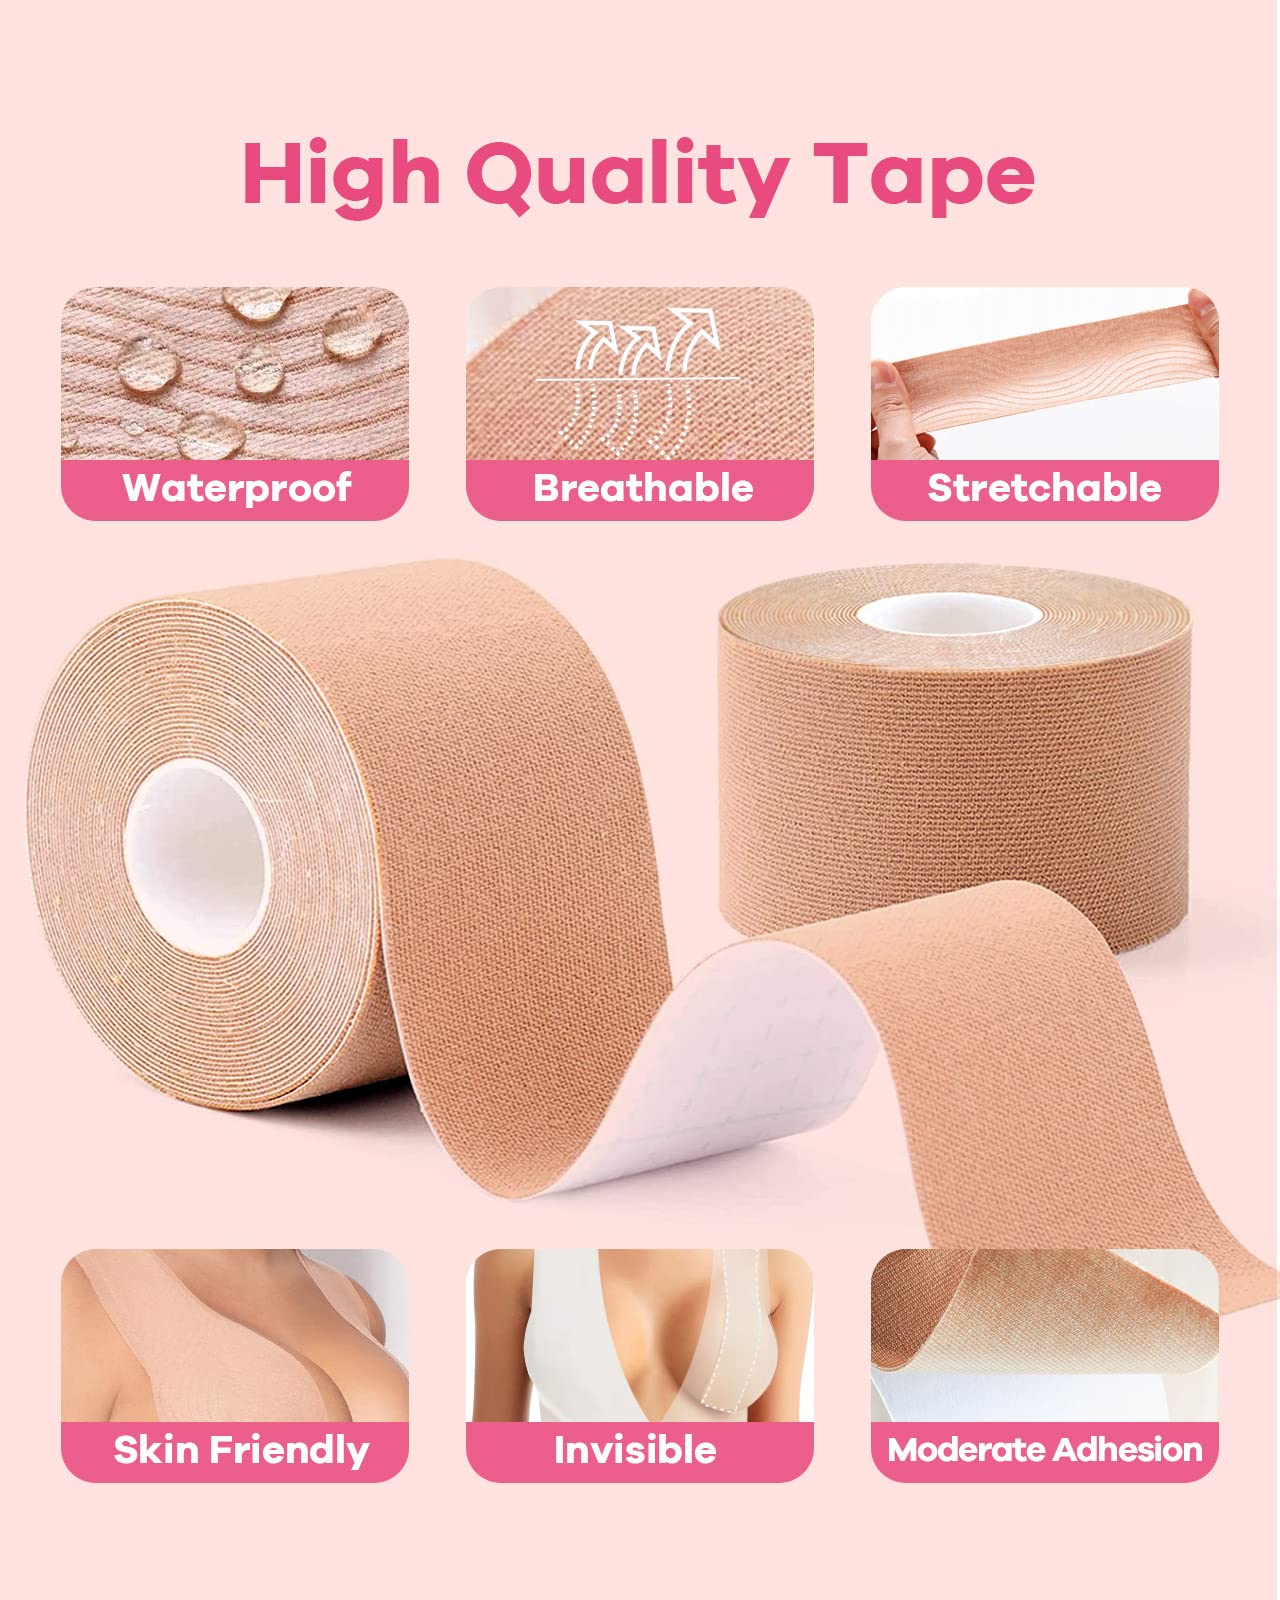 Boob Tape, Boobytape for Breast Lift, Bob Tape for Large Breast, Breathable Push Up Tape, Waterproof & Sweatproof Body Tape, Used Along with 1-Pair Reusable Silicone Covers